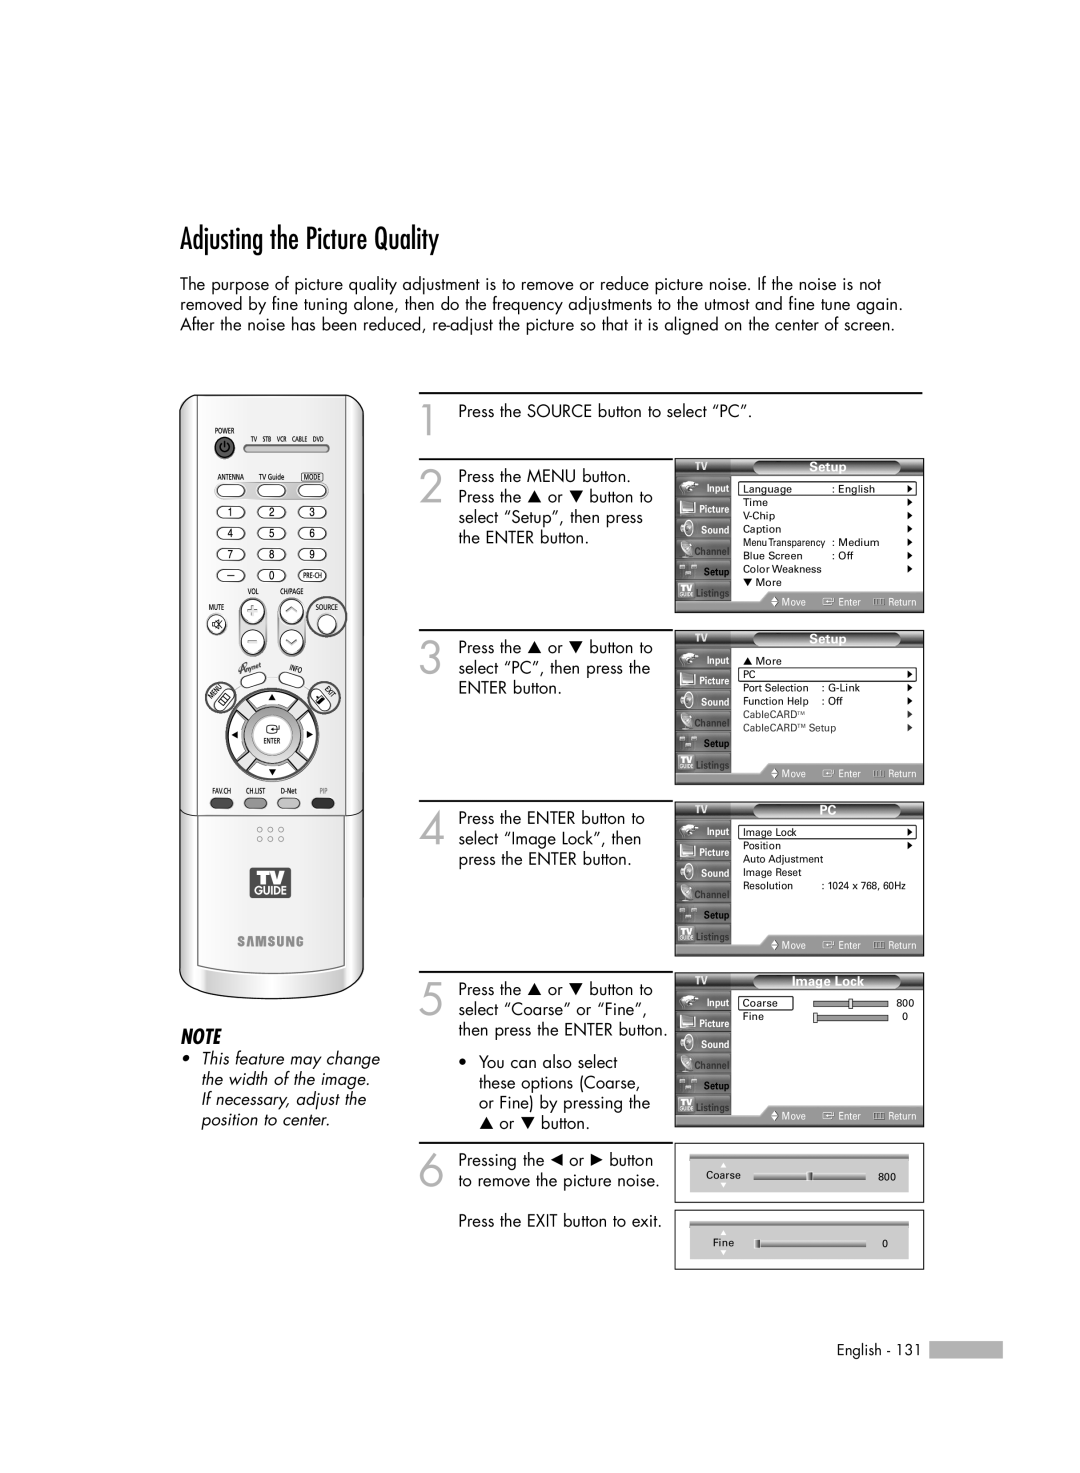 Samsung HL-R5688W manual Adjusting the Picture Quality, Channel, Listings 